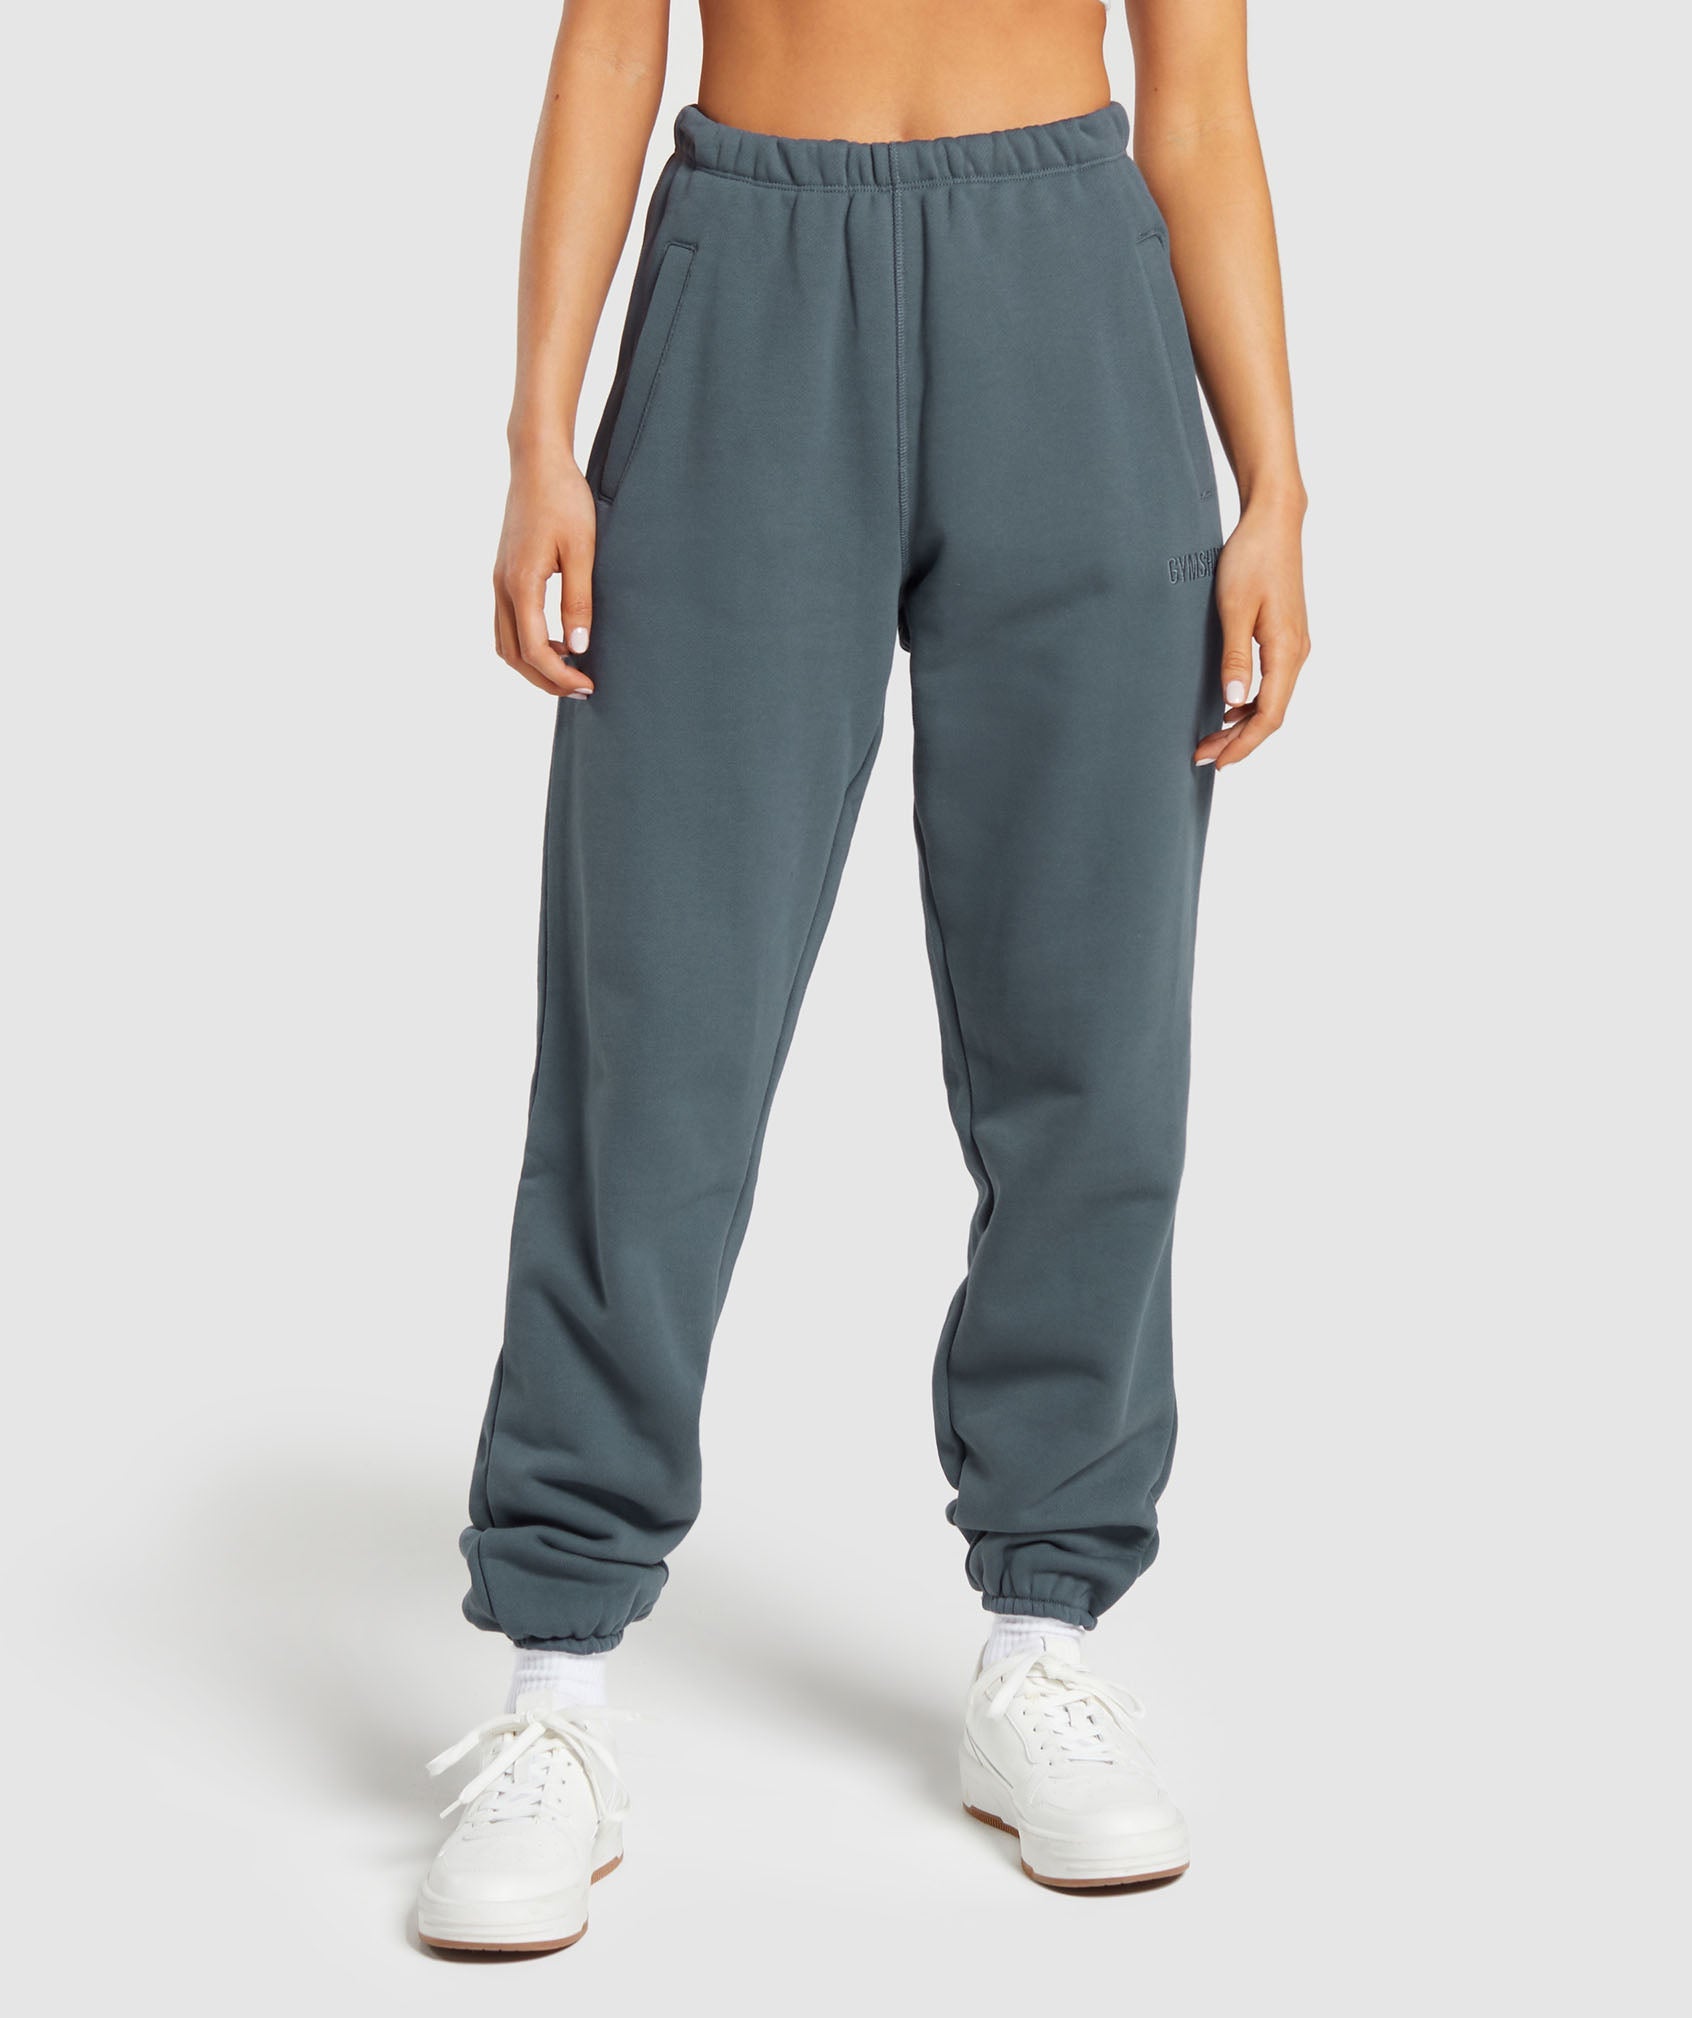 Gymshark Pippa Training Joggers Green - $17 (43% Off Retail) - From Audrey